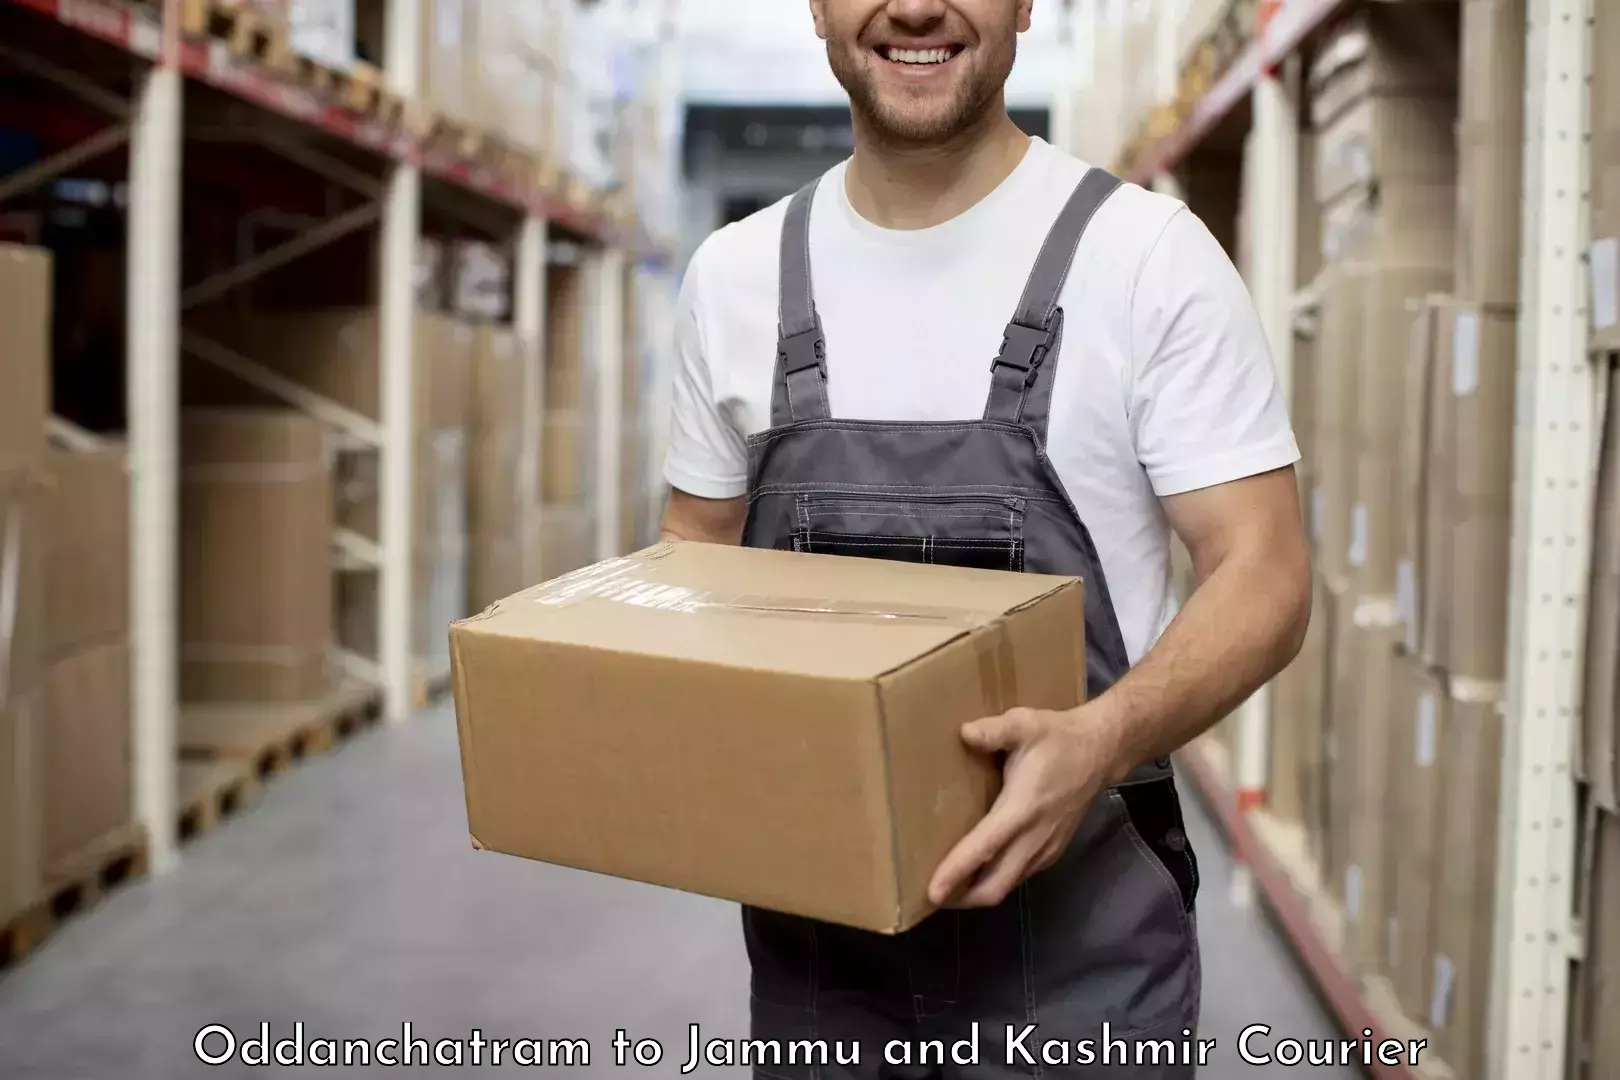 Customized delivery options Oddanchatram to Shopian